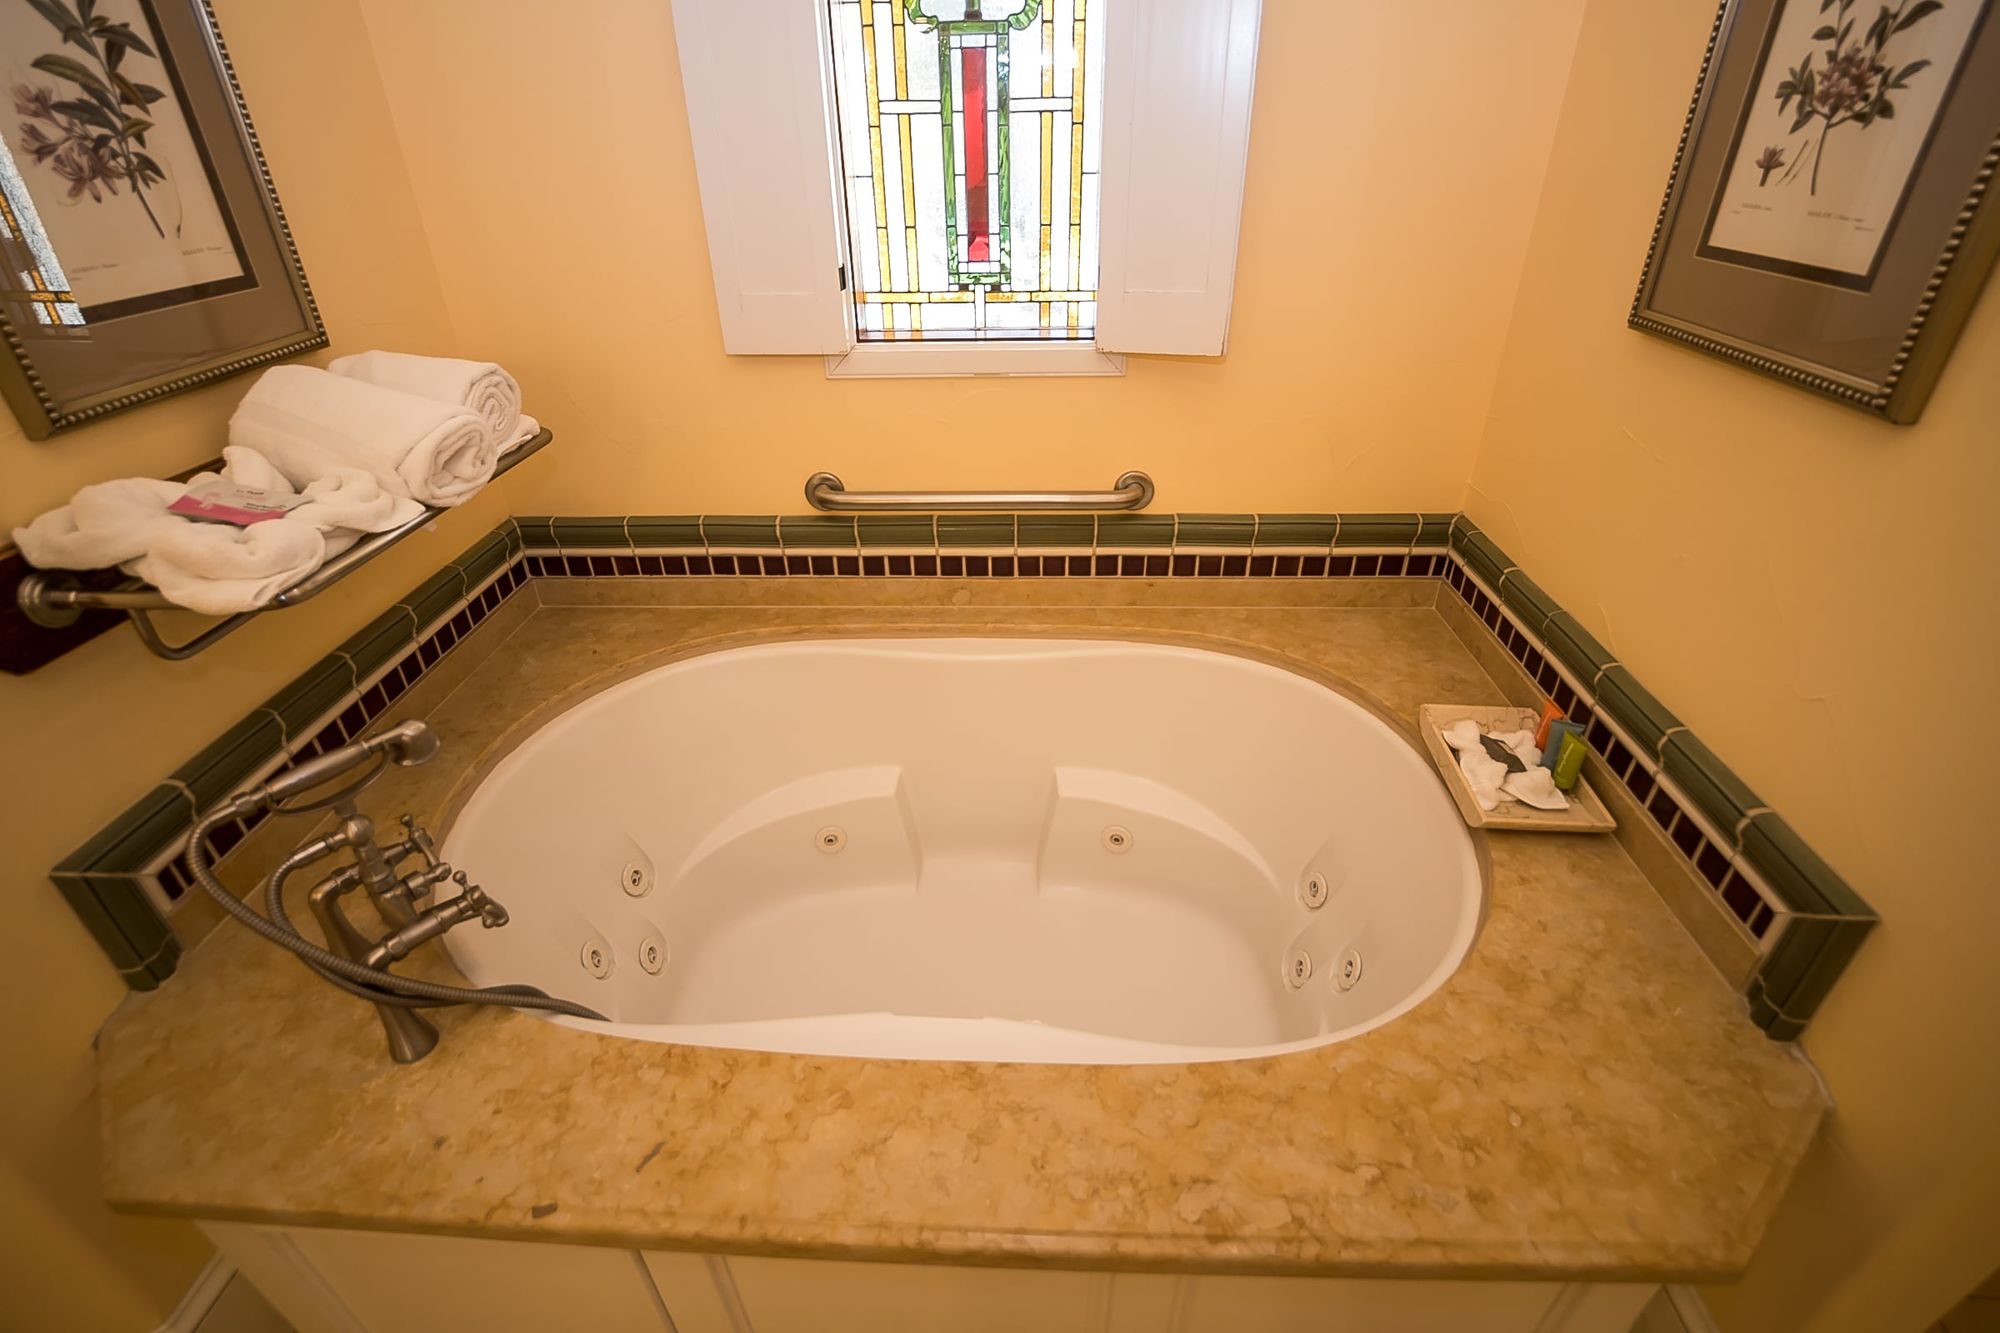 Spa bathtub with pile of towels to the left and soaps in a dish to the right